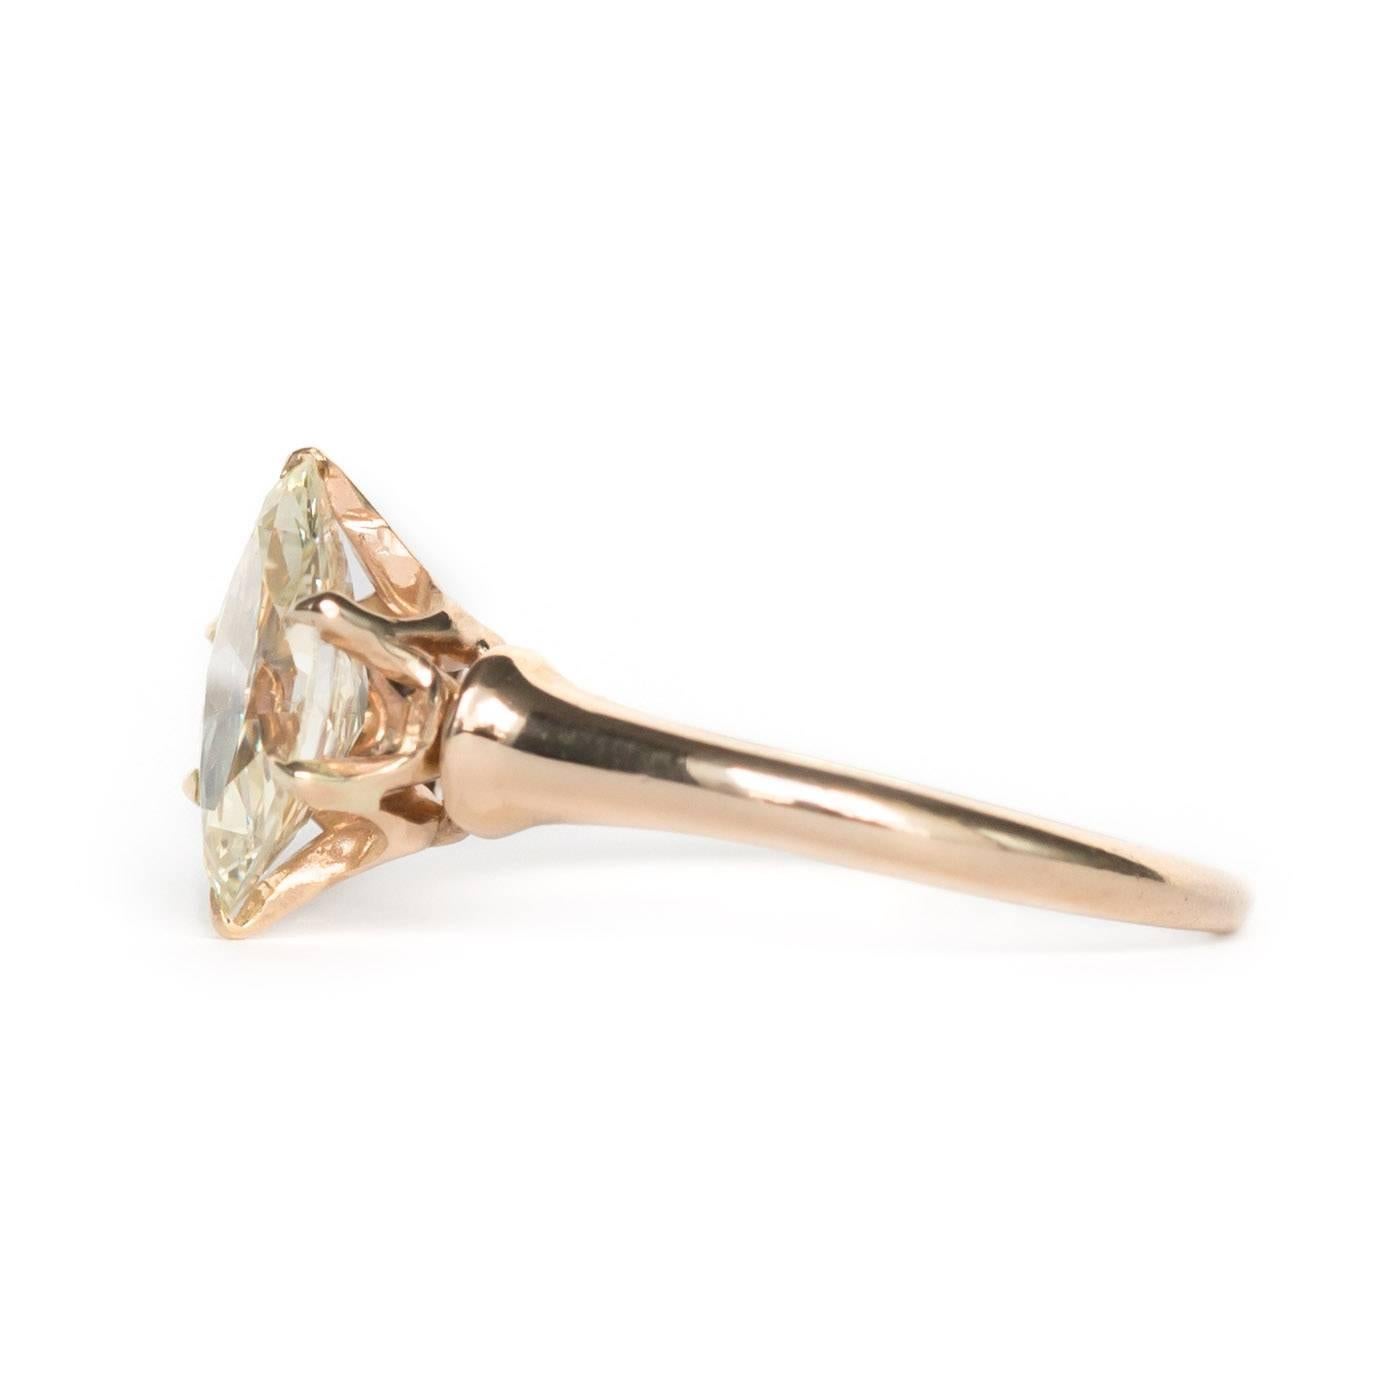 Item Details: 
Ring Size: 6.25
Metal Type: 9 Karat Yellow Gold
Weight: 2.1 grams

Center Diamond Details
Shape: Antique Marquise Cut
Carat Weight: 1.11carat
Color: Light Yellow
Clarity: VS

Finger to Top of Stone Measurement: 5.66mm